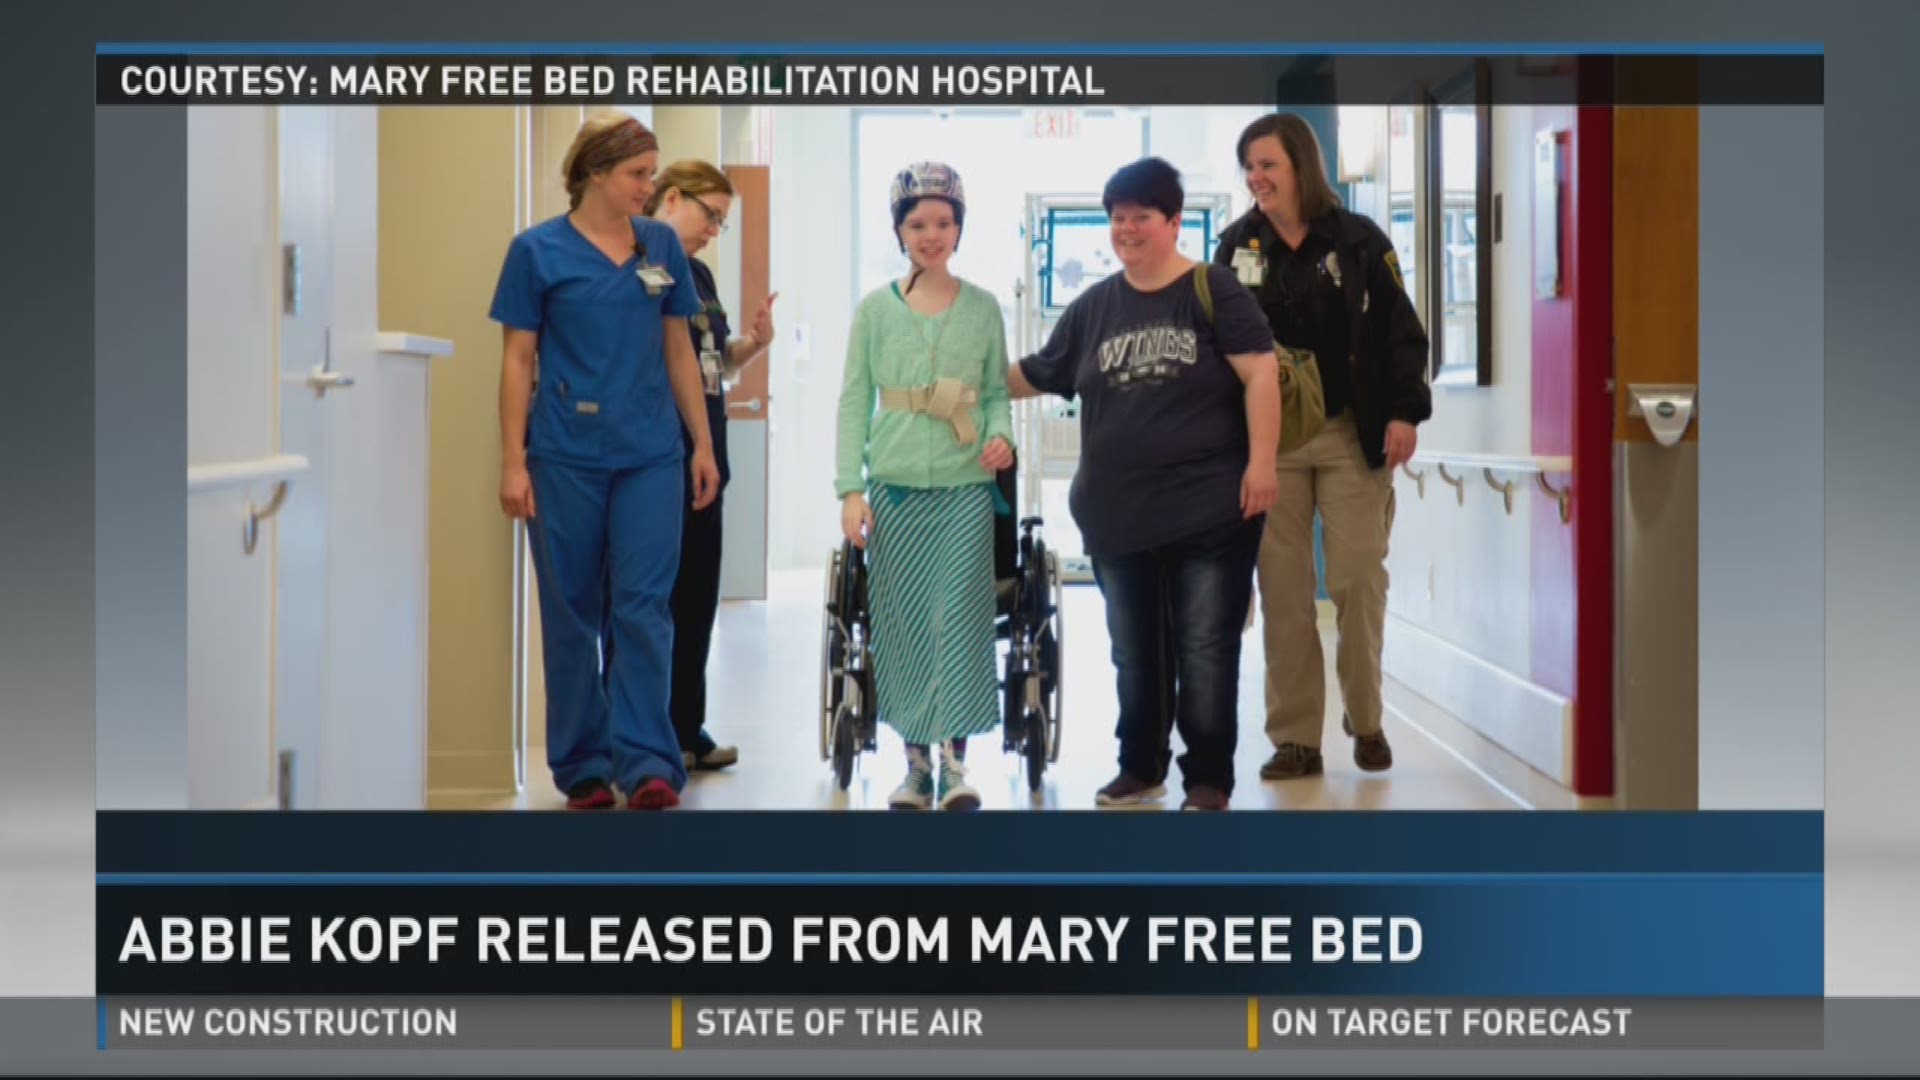 After six weeks of intensive therapy, Kopf graduated from Mary Free Bed Rehabilitation Hospital in Grand Rapids and today, her parents took her home to Battle Creek.